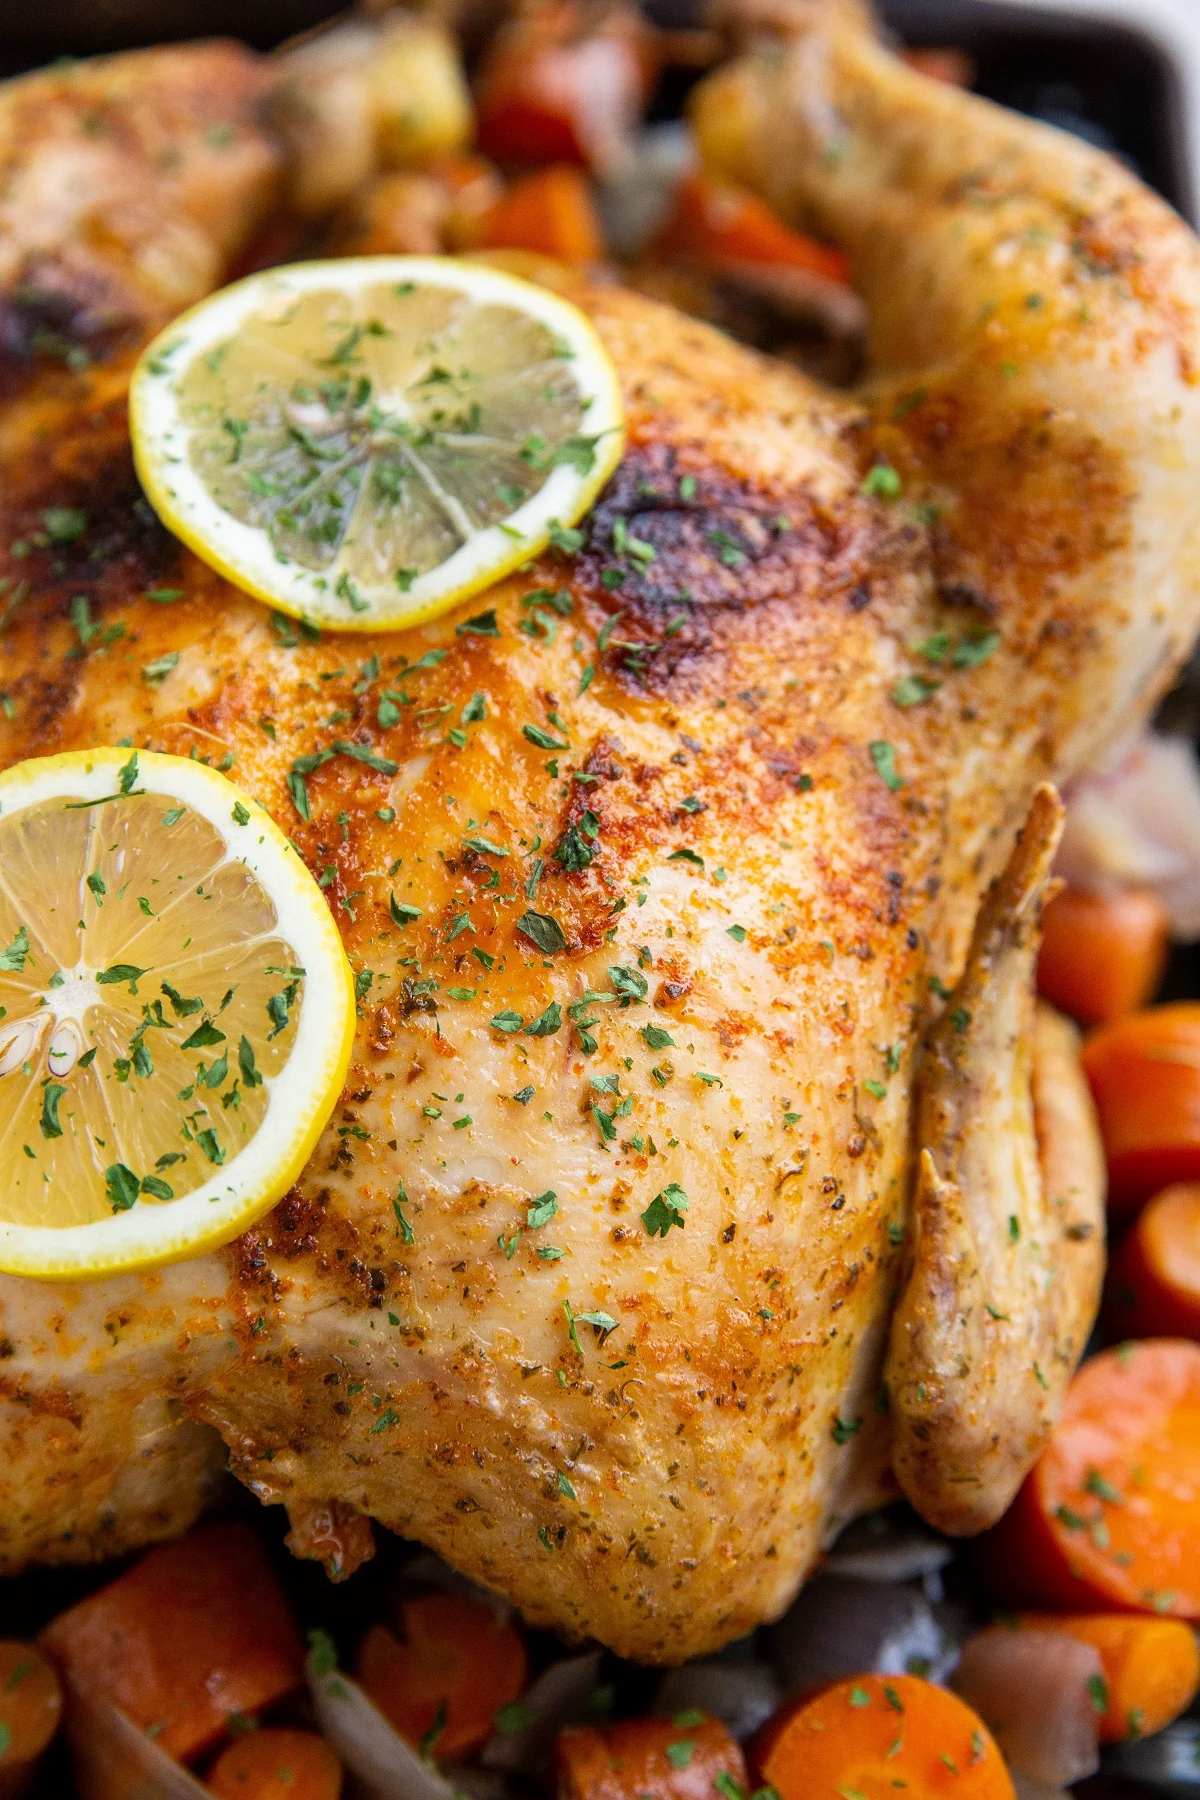 Whole cooked chicken on a baking sheet with lemon slices and vegetables.